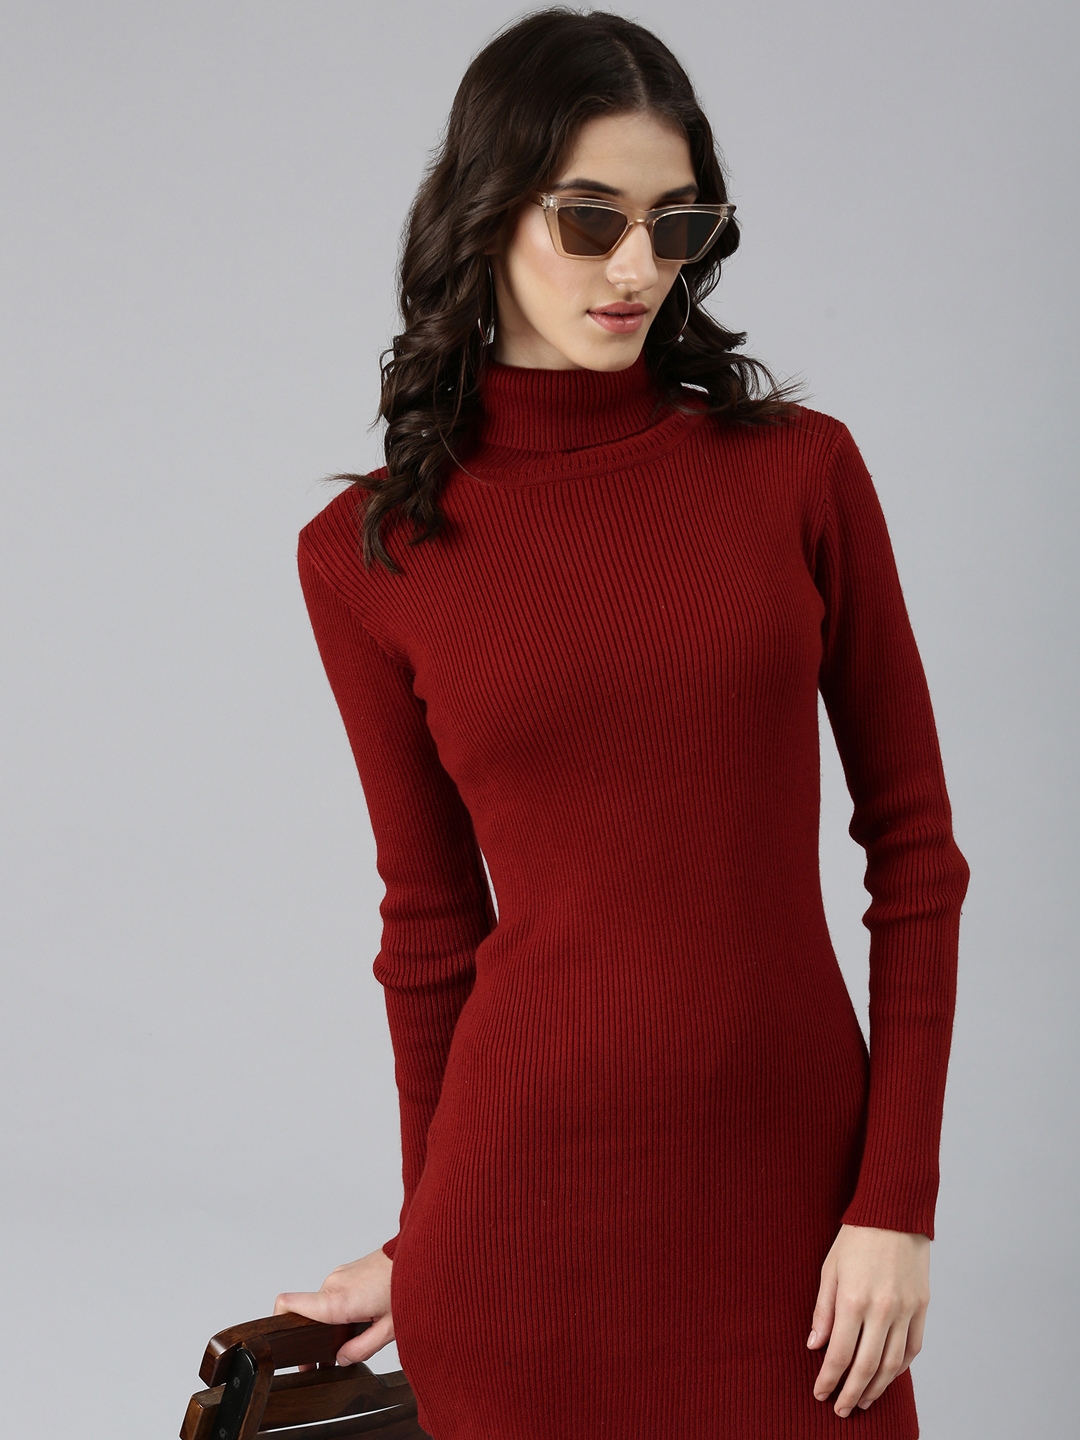 SHOWOFF Women's High Neck Long Sleeves Bodycon Solid Maroon Above Knee Dress